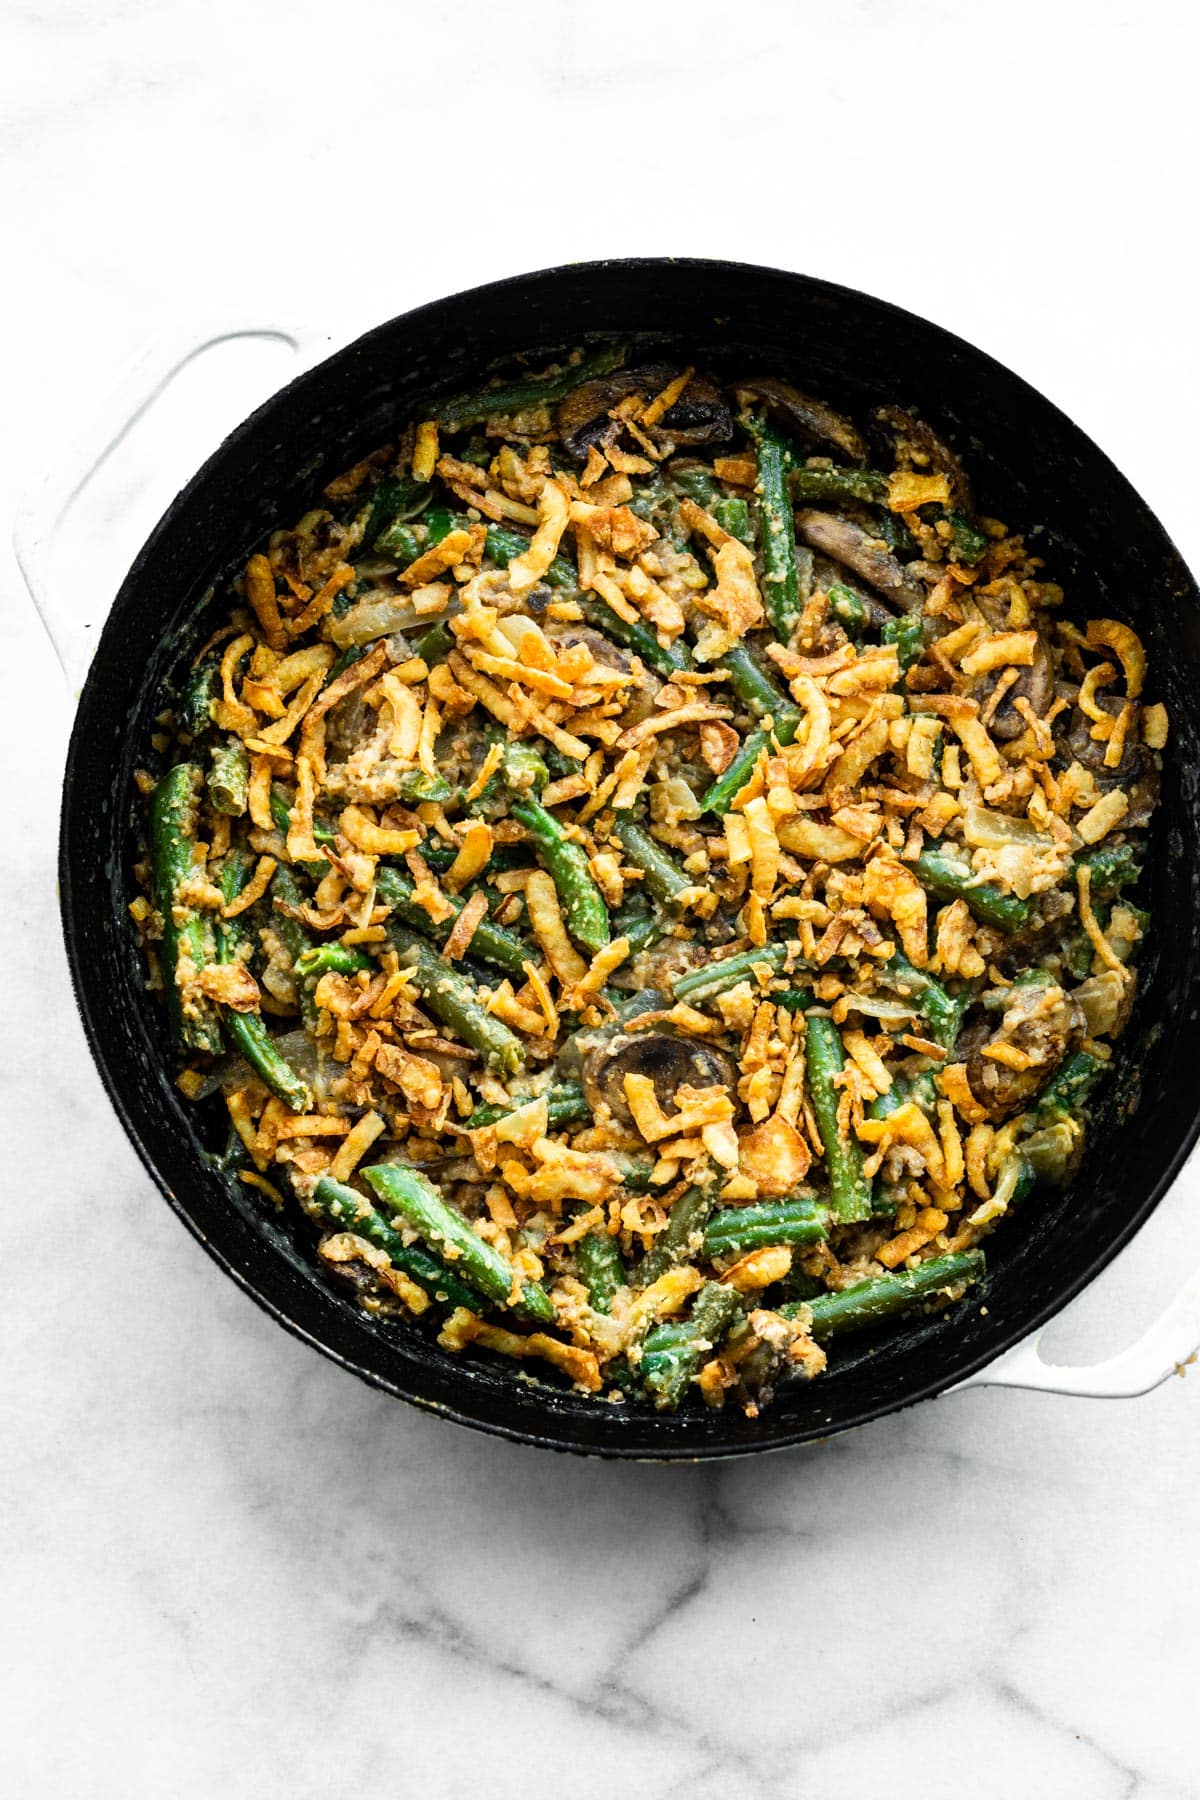 A pan of vegan green bean casserole topped with crispy fried onions.